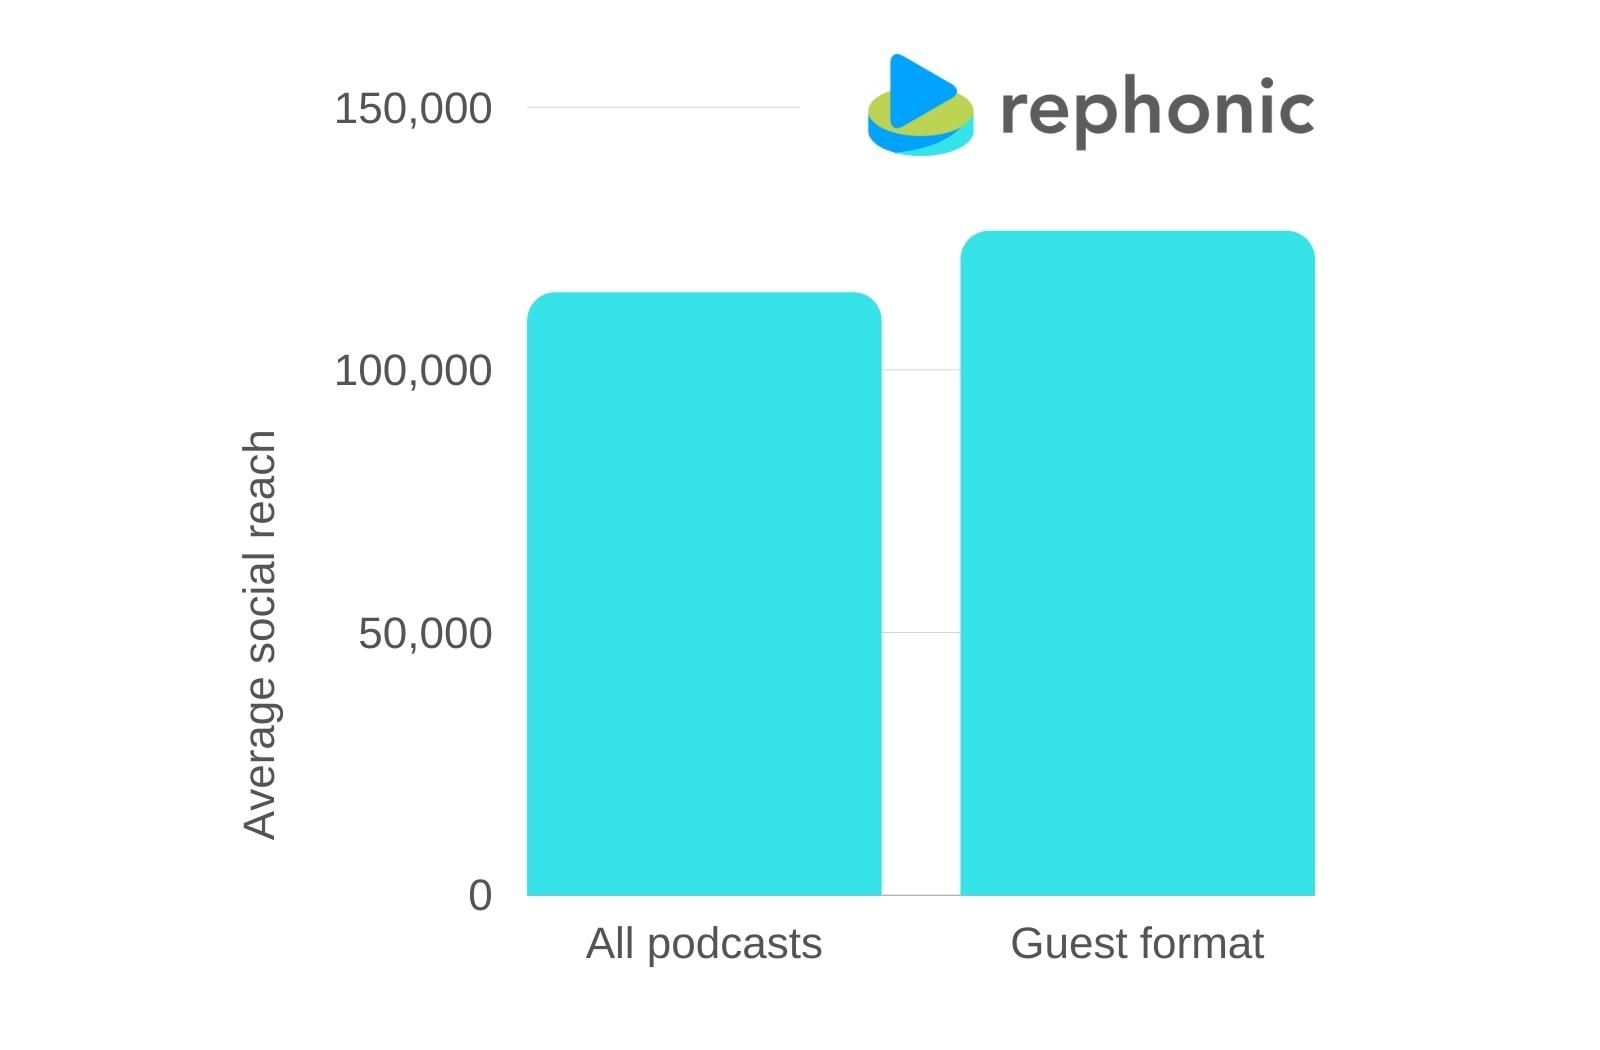 Average social reach of podcasts